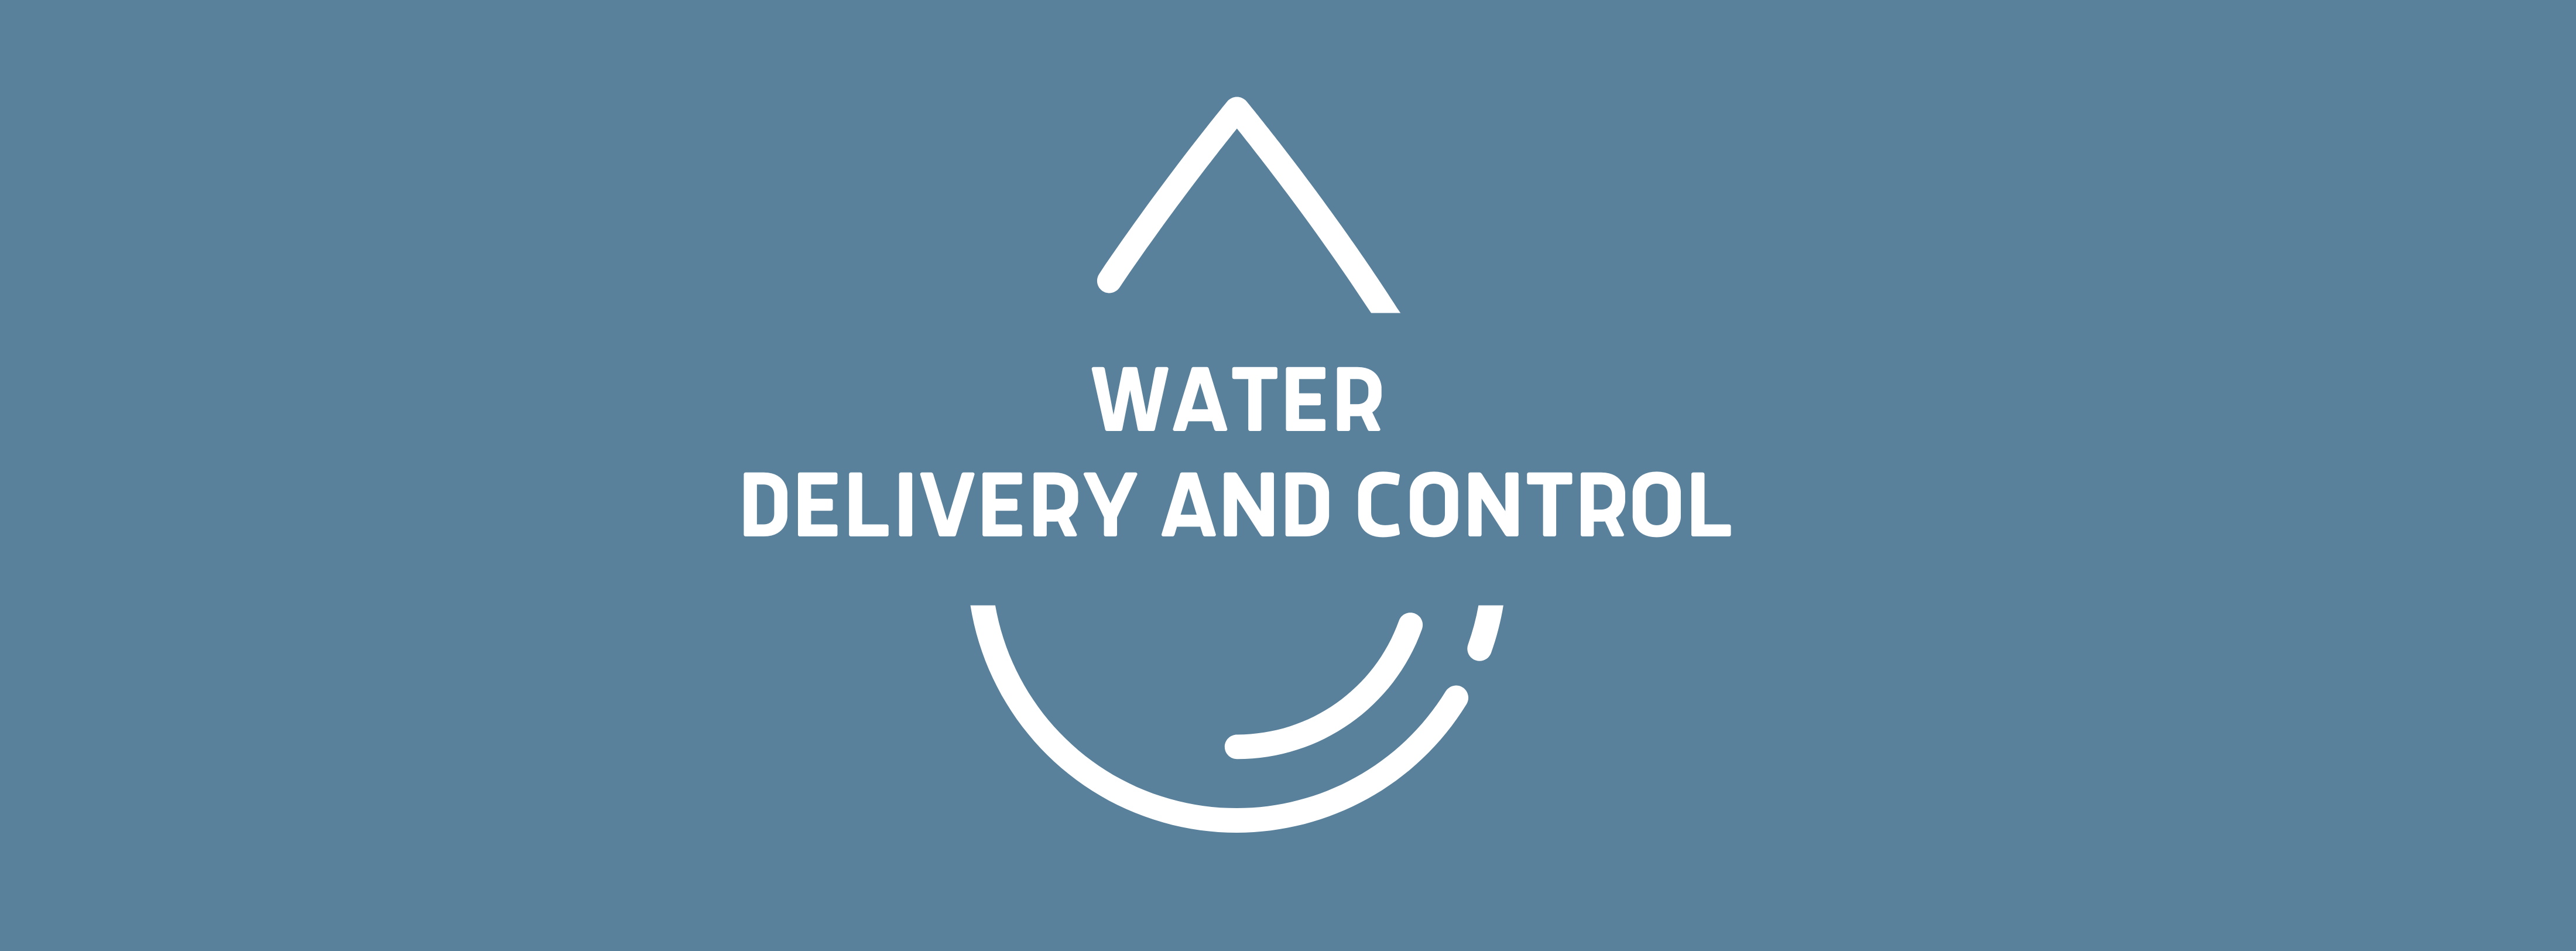 water delivery and control